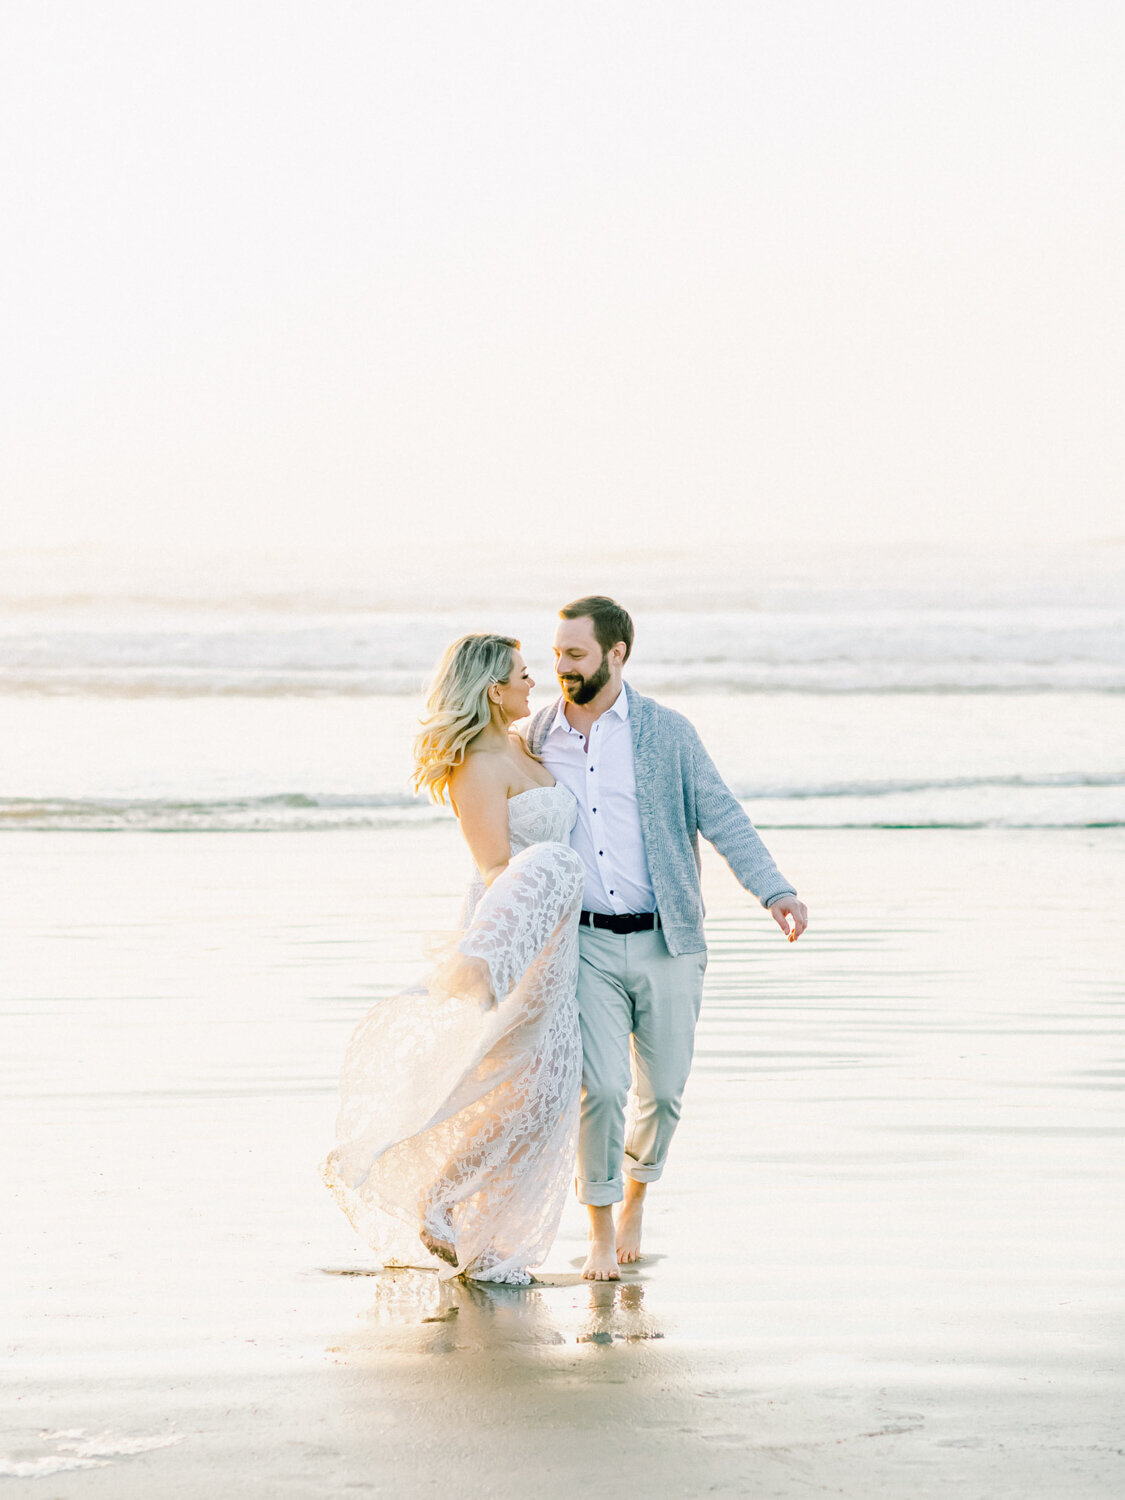 Elopement on the beach in Cannon Beach Oregon